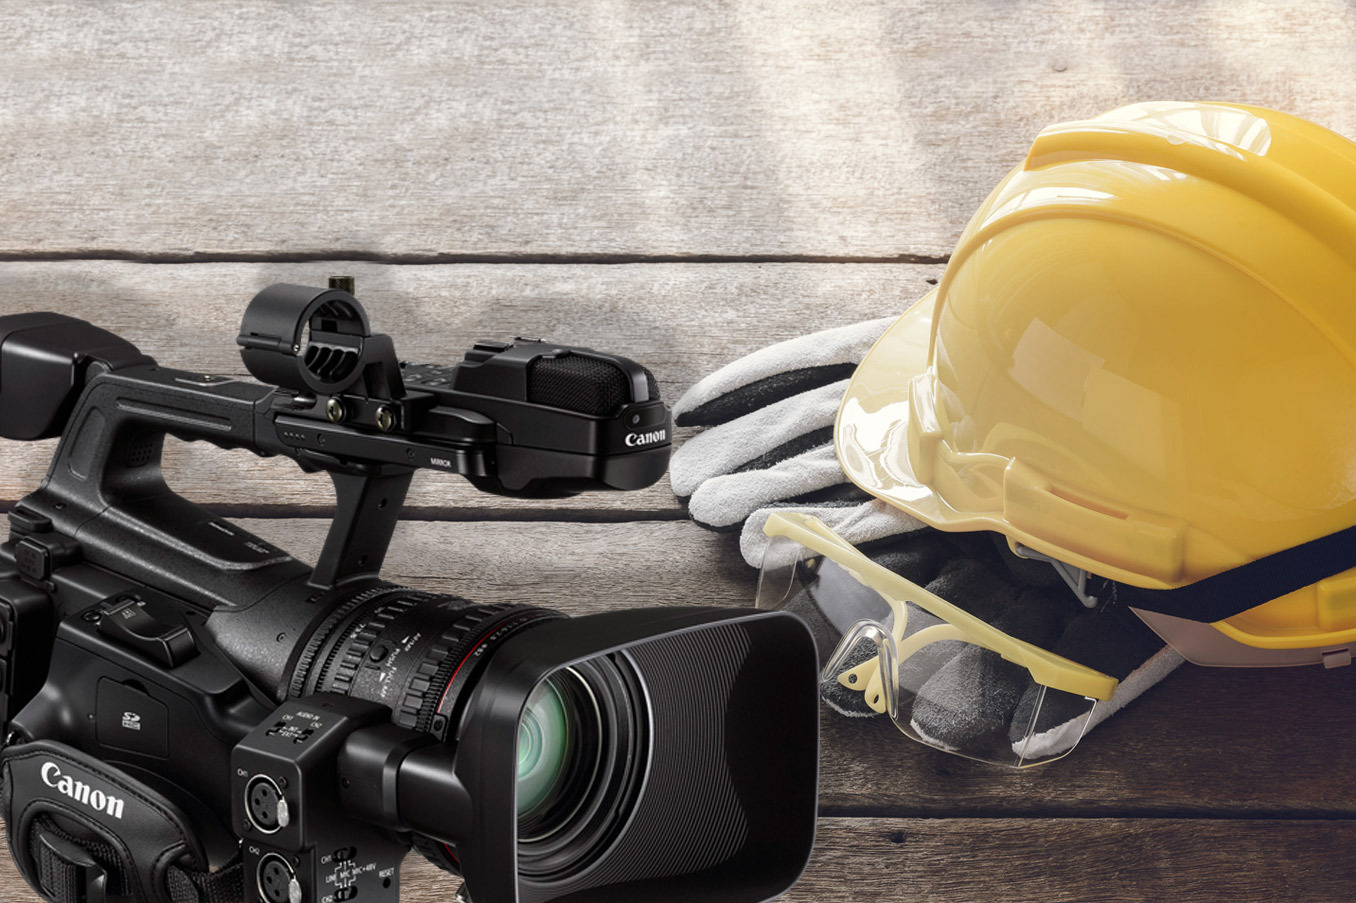 Video Testimonial Shooting For Contractors